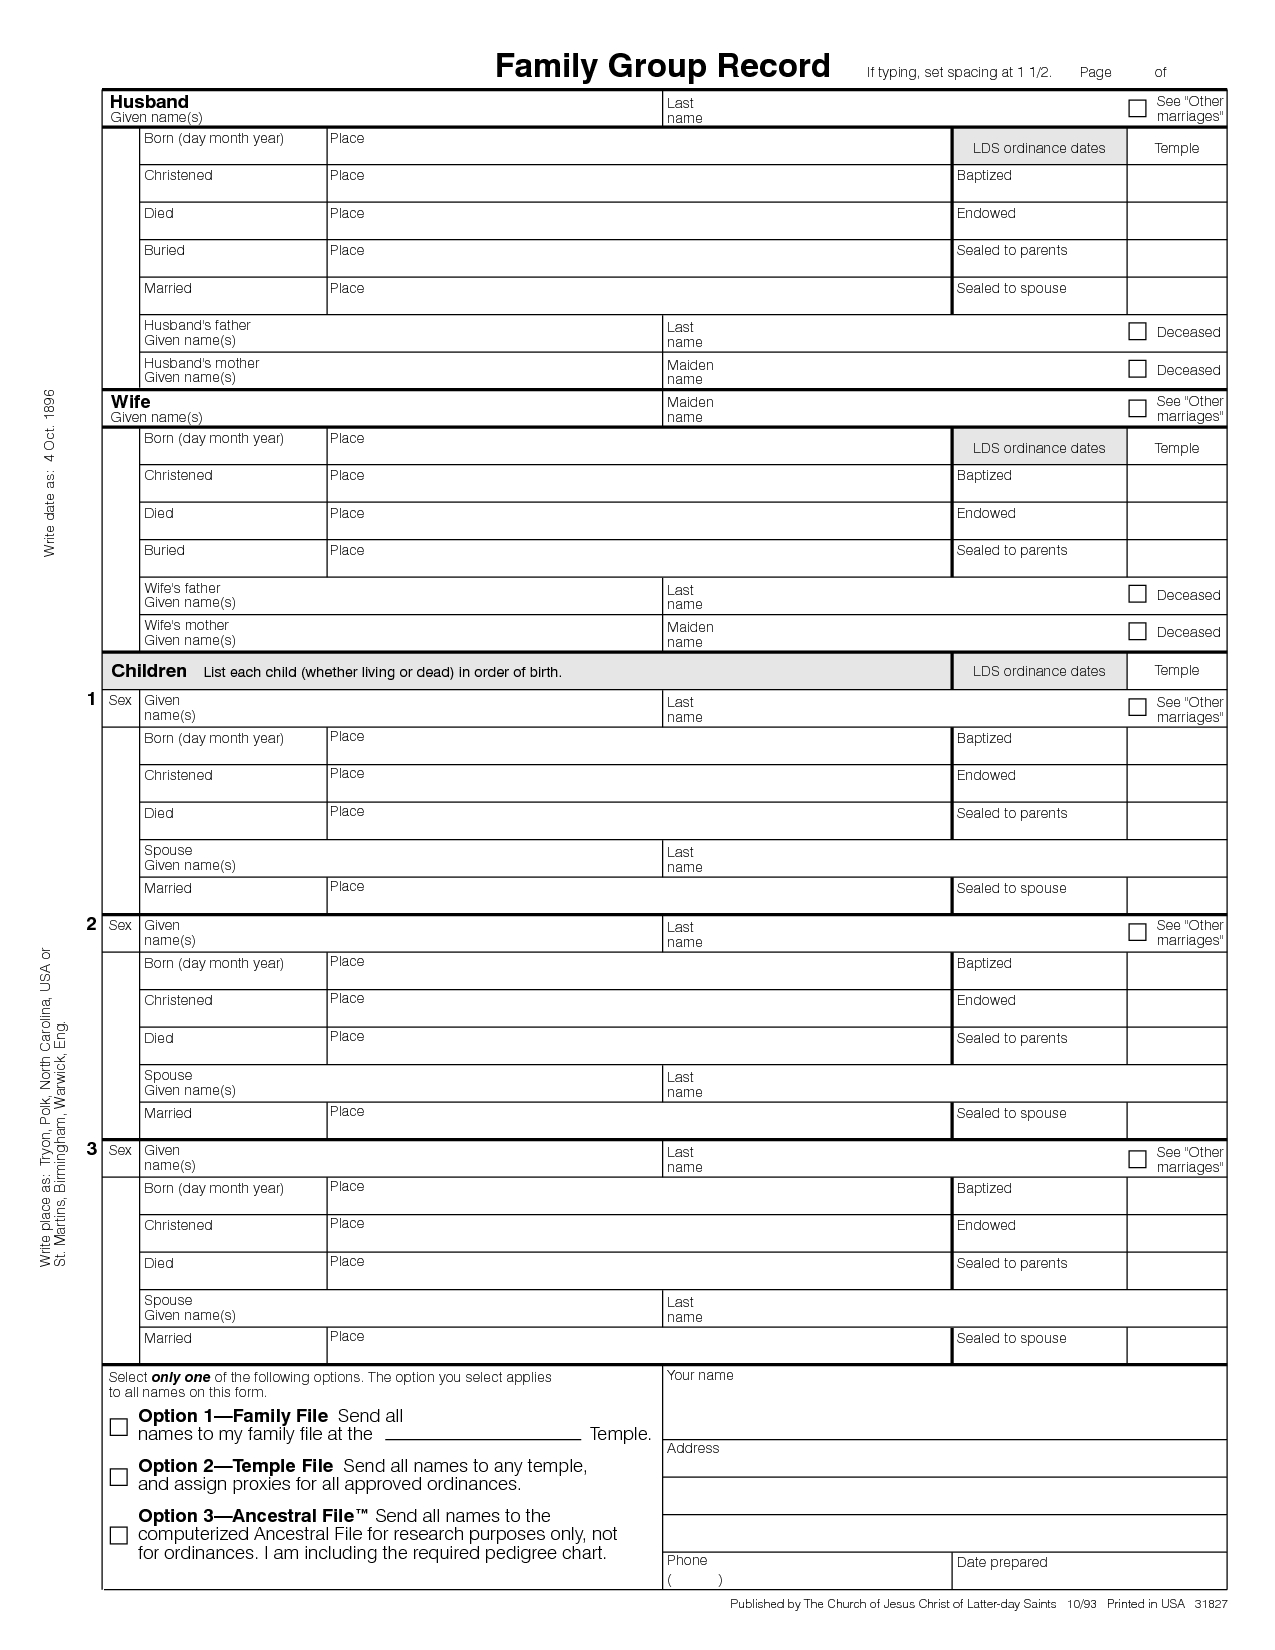 Genealogy Worksheets Siblings - Google Search | History | Genealogy - Free Printable Family History Forms